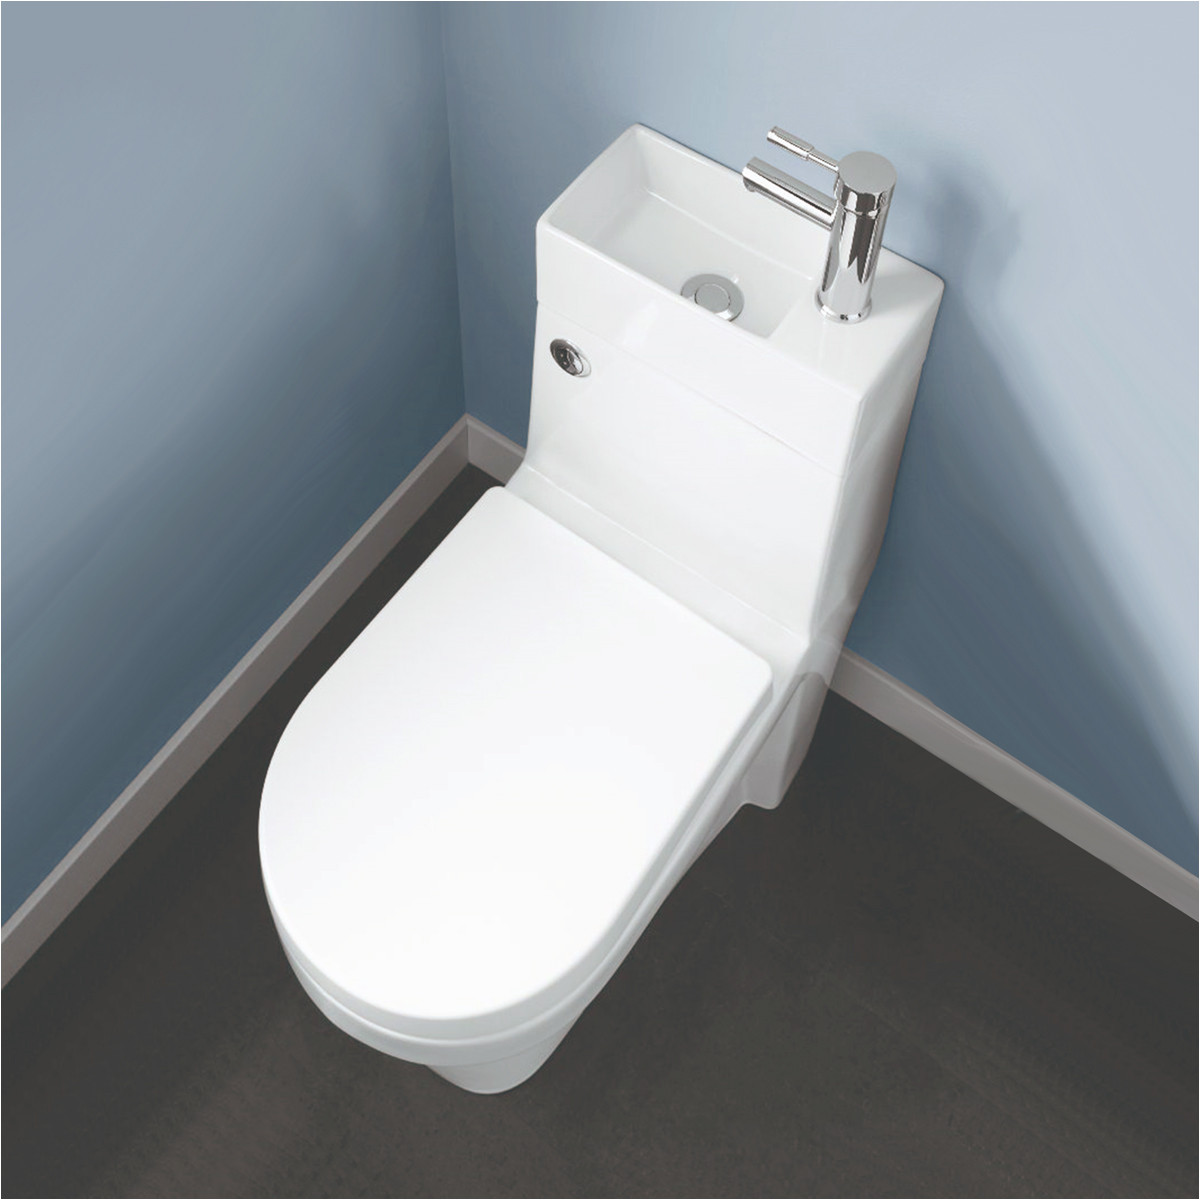 Toilet Sink Combo Units for Sale Ireland Combination Close Coupled toilet with Wash Basin Two In One Unit